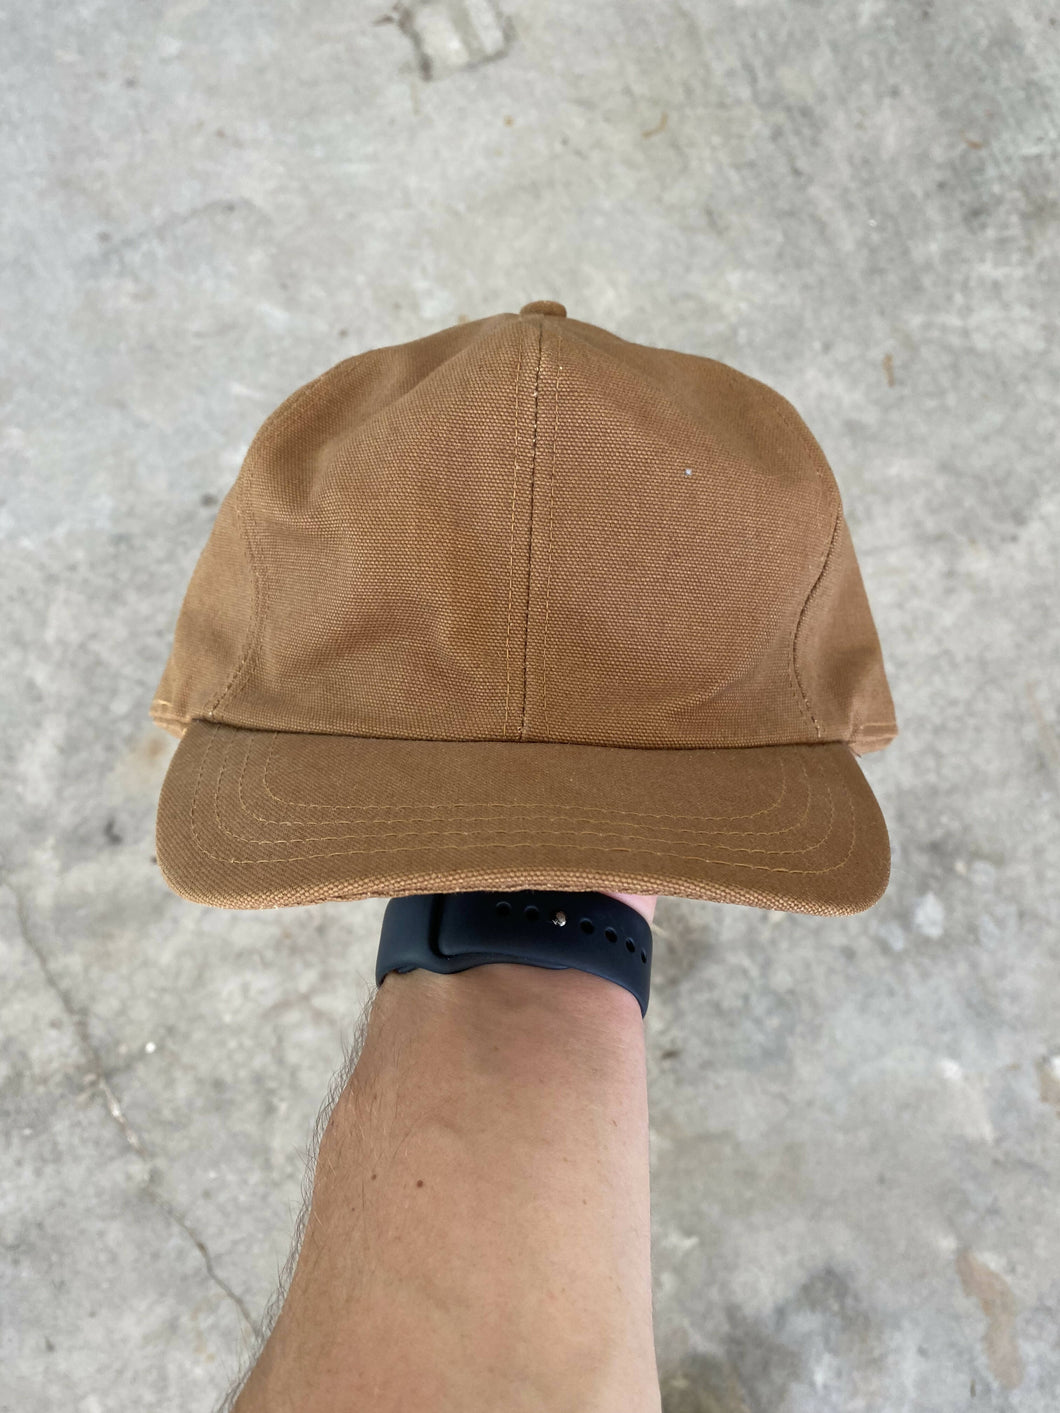 Vintage Thinsulate Brown Canvas Insulated Hat